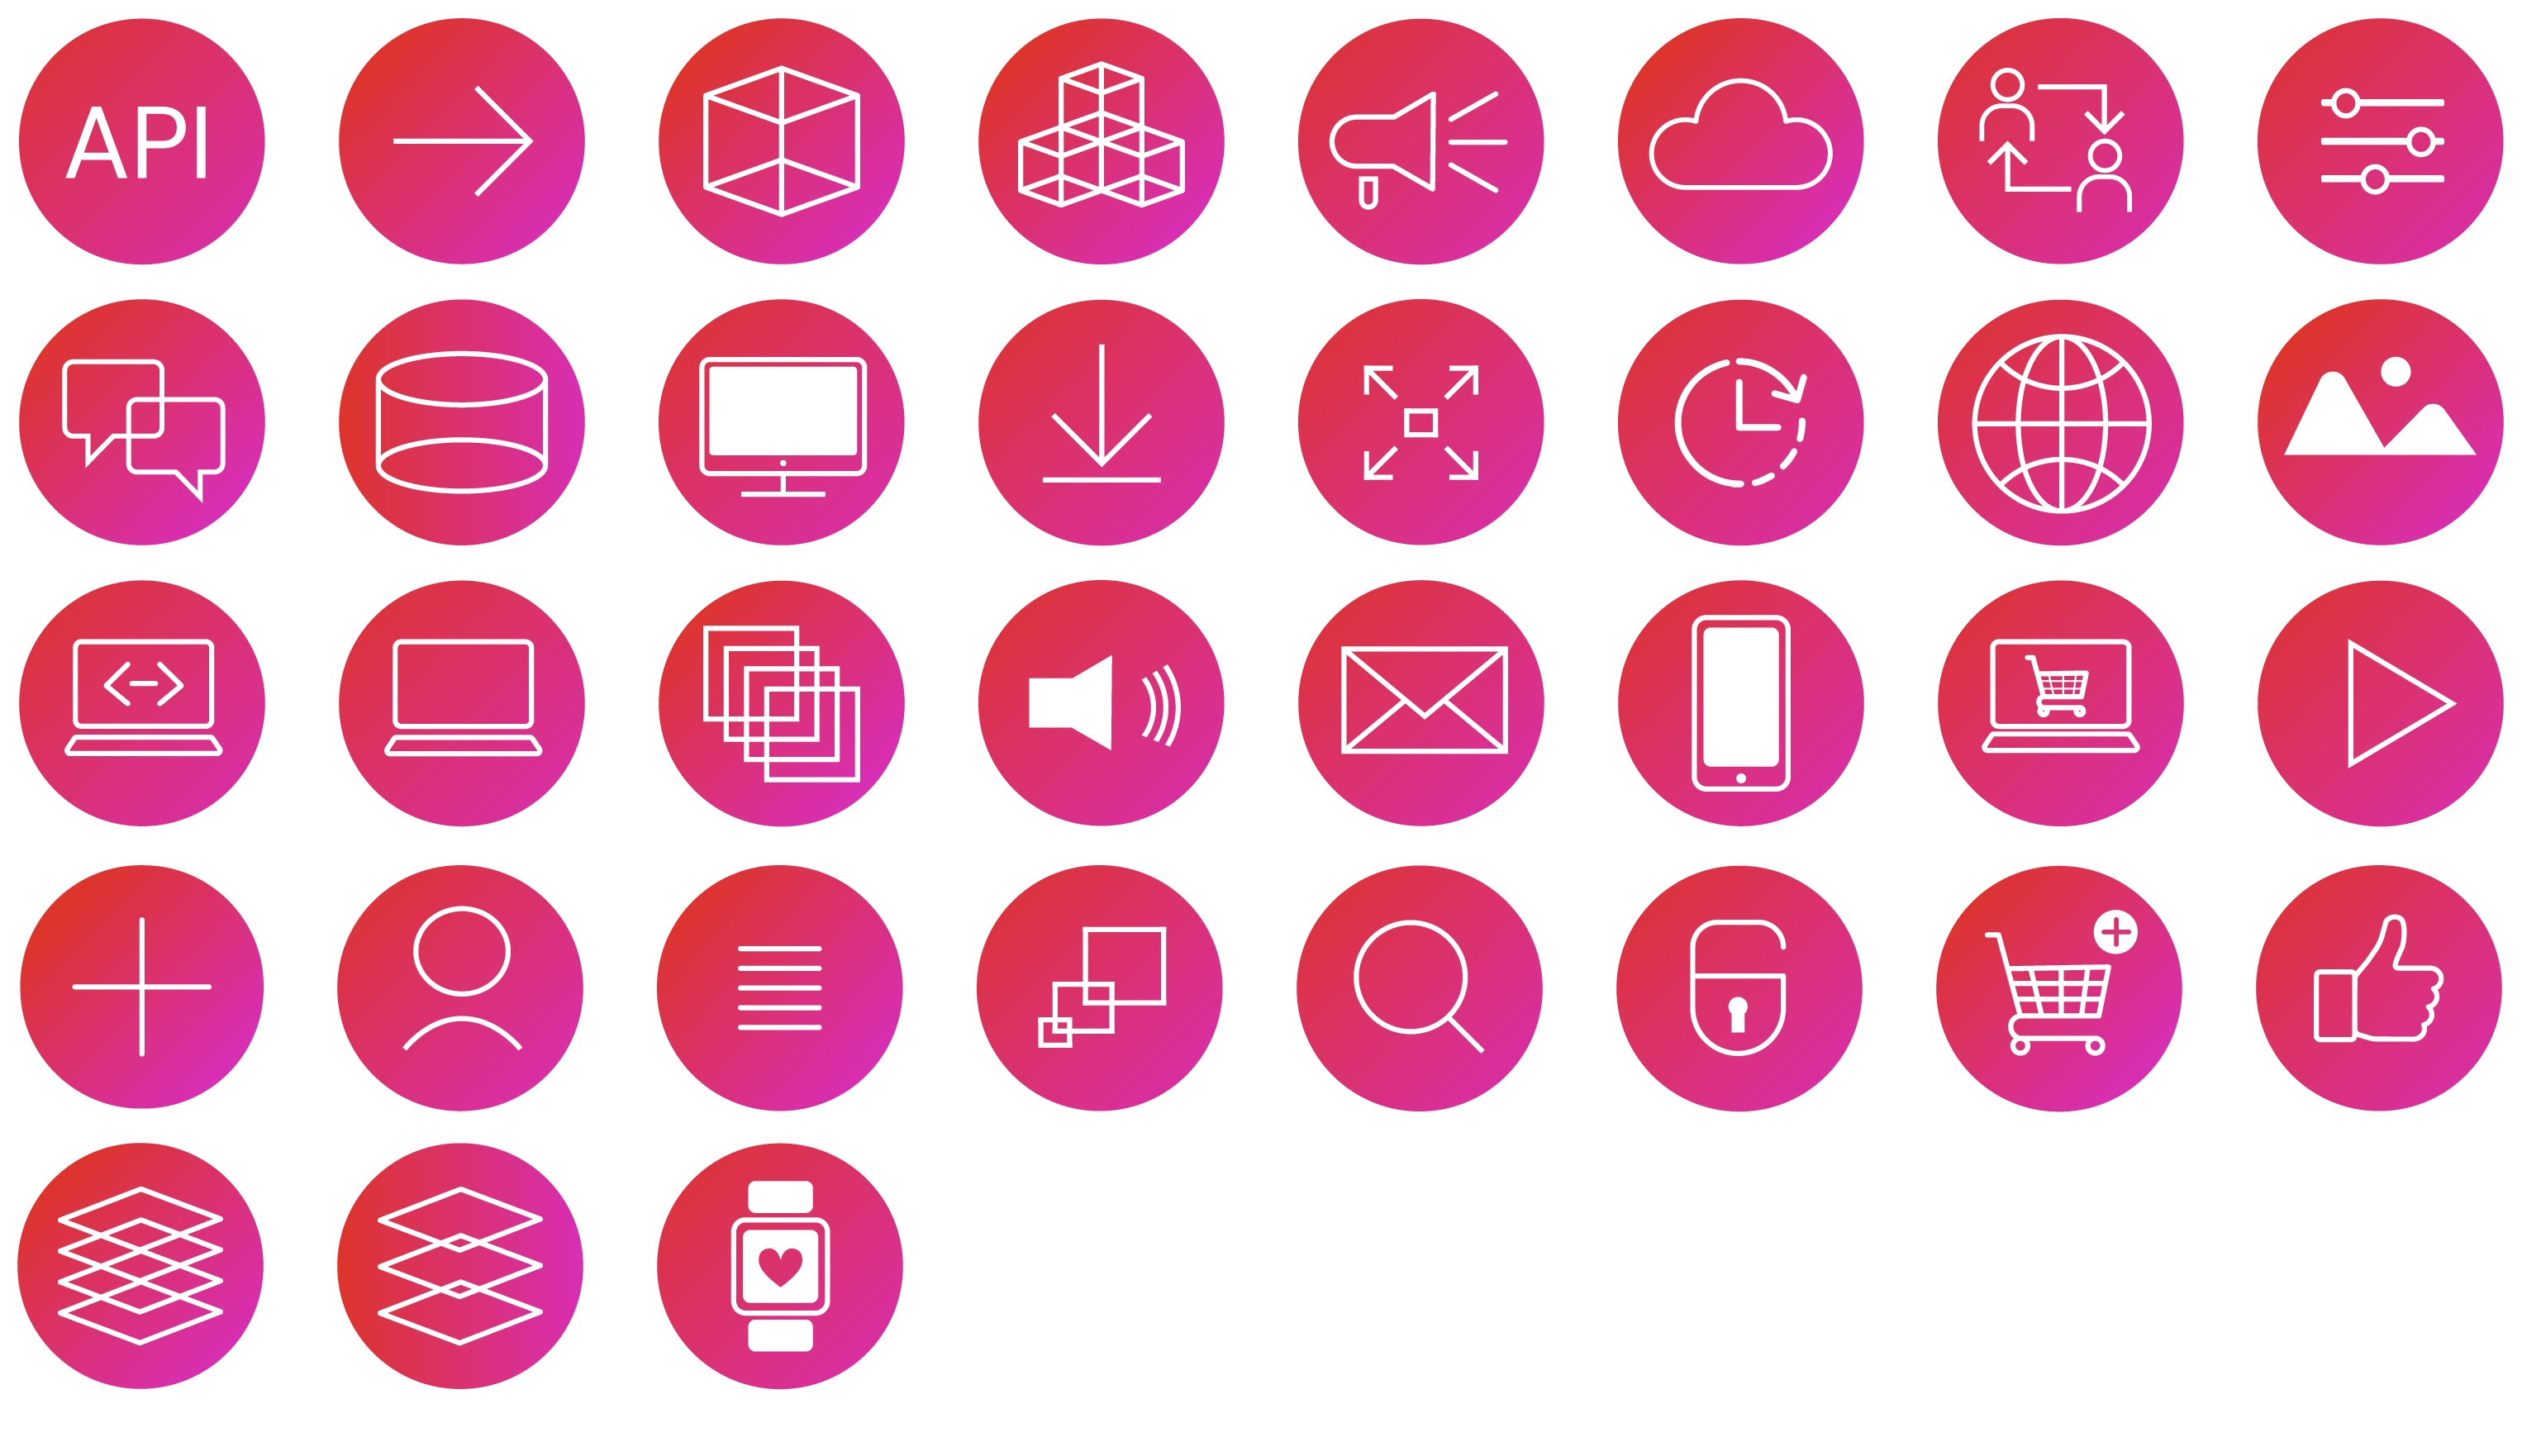 Example of graphic icons in CoreMedia brand colors